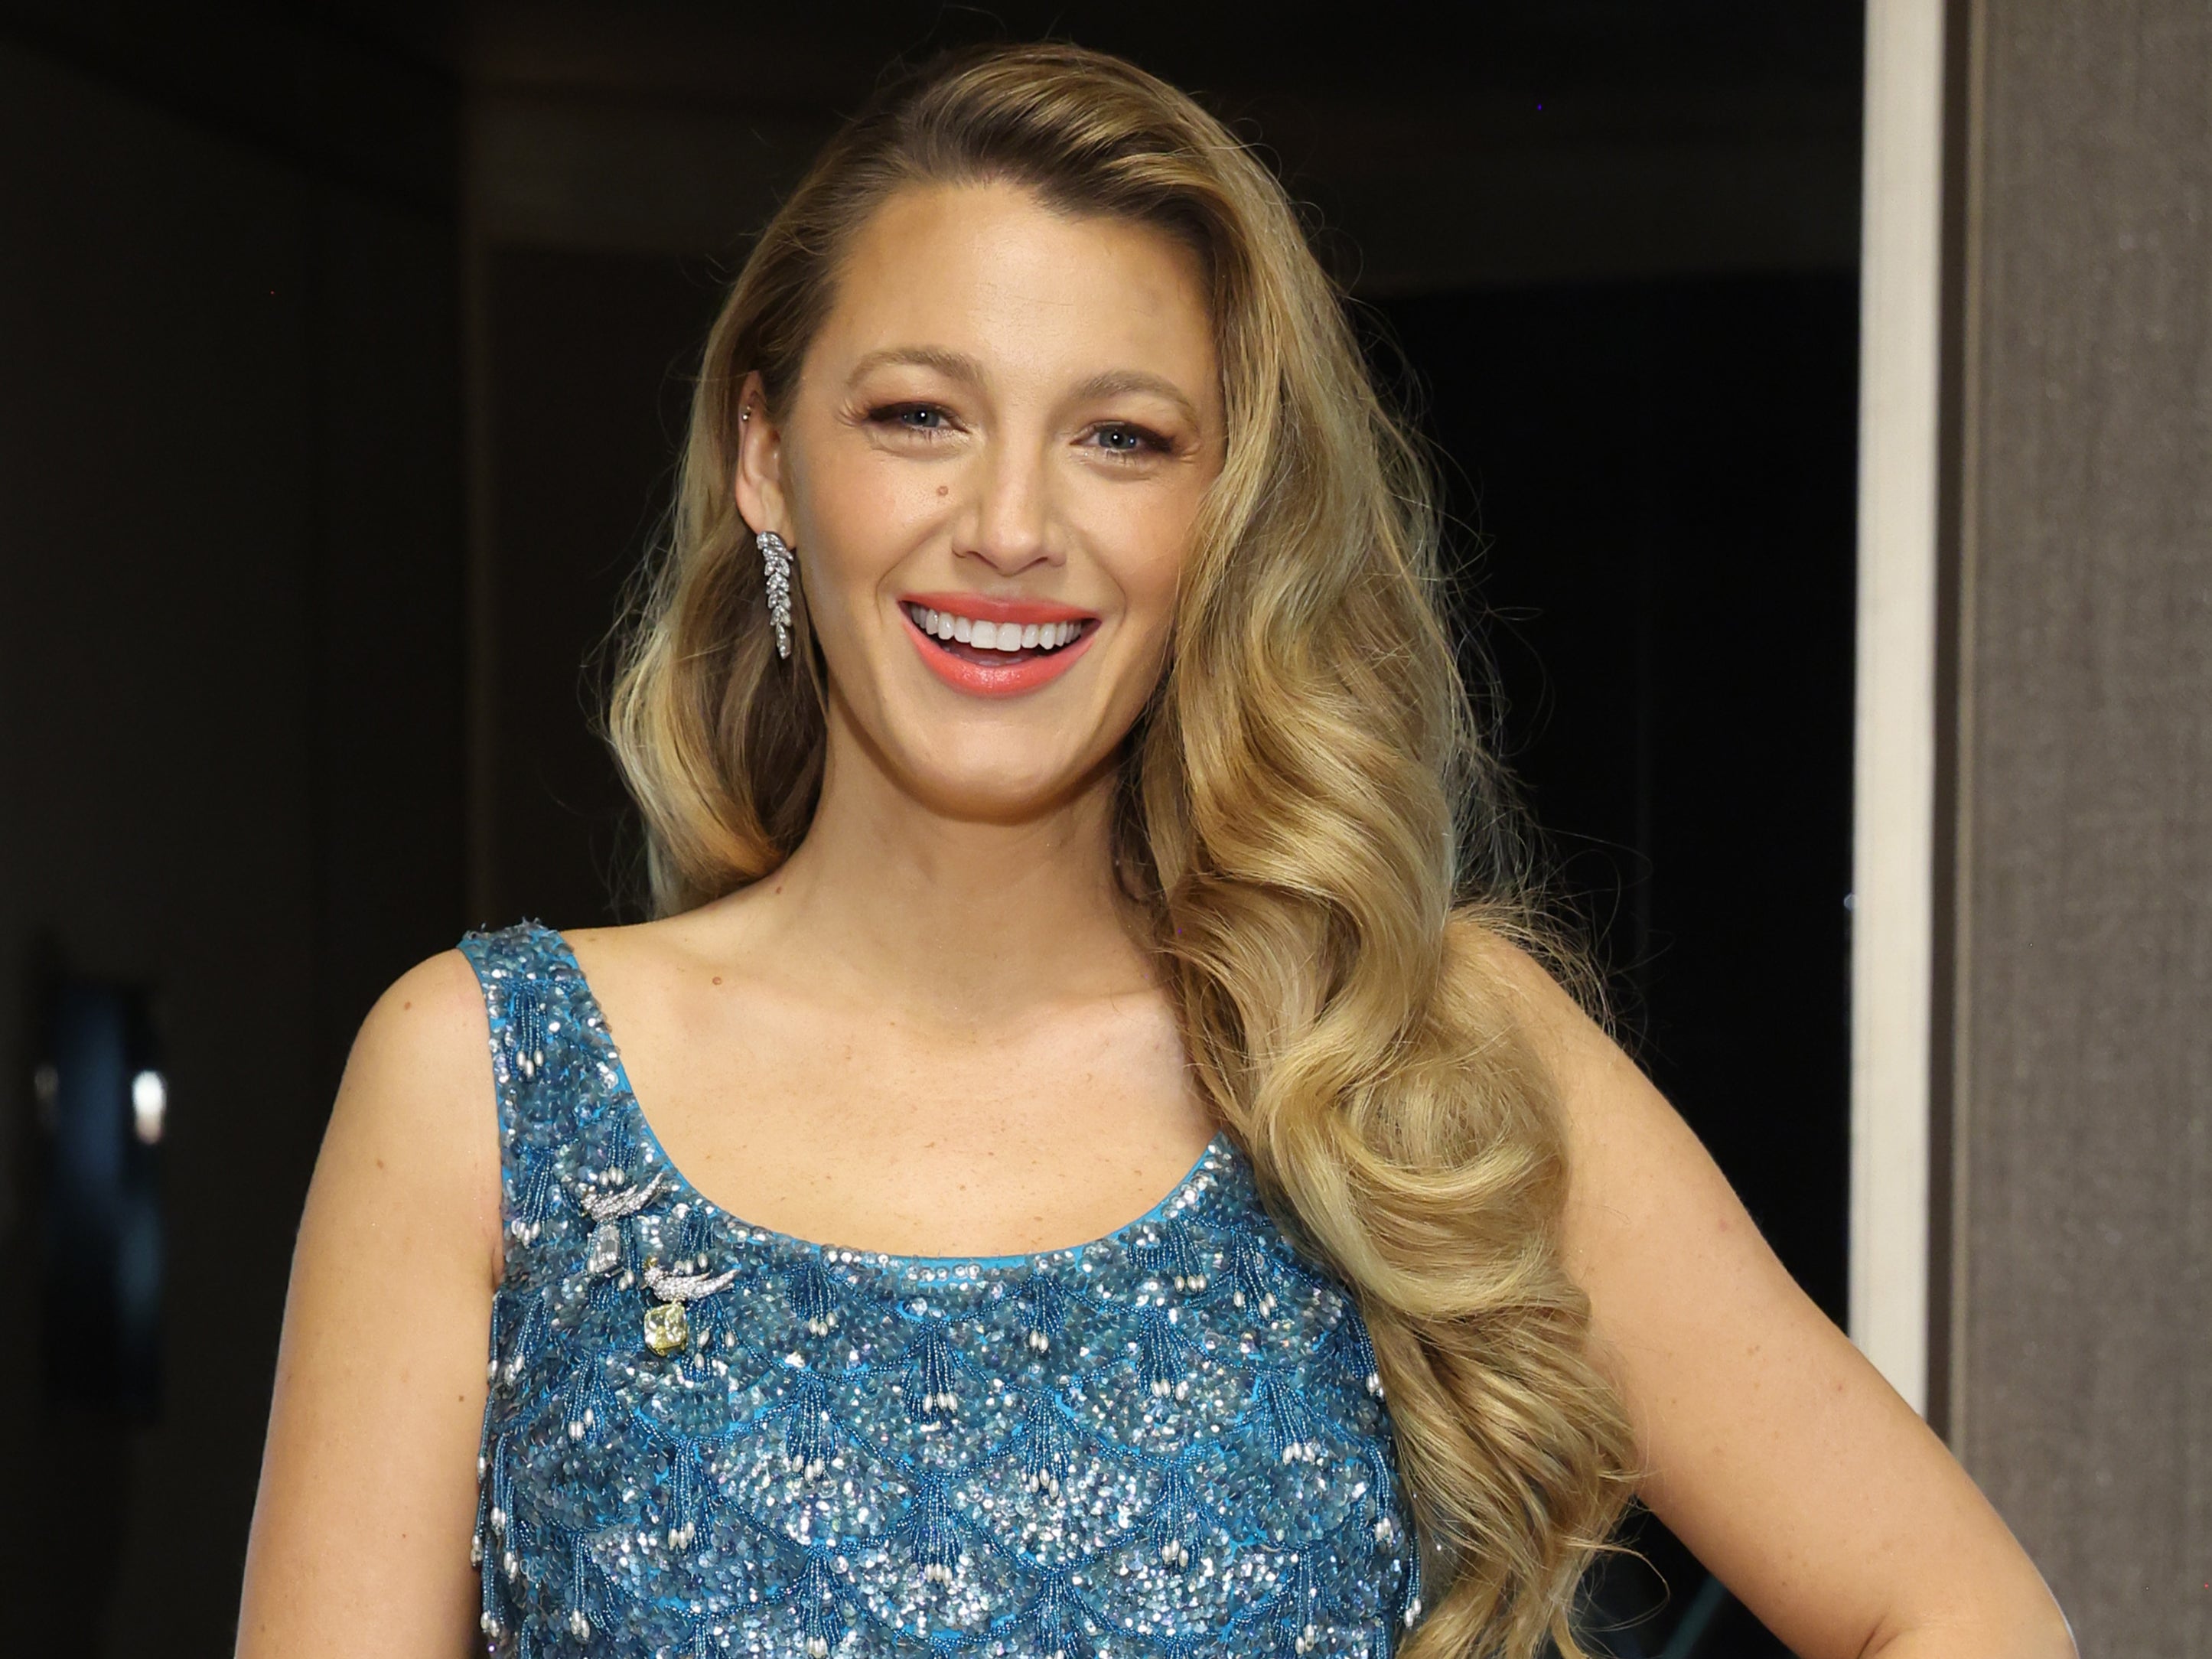 Blake Lively reveals she received ‘the best compliment’ of her life